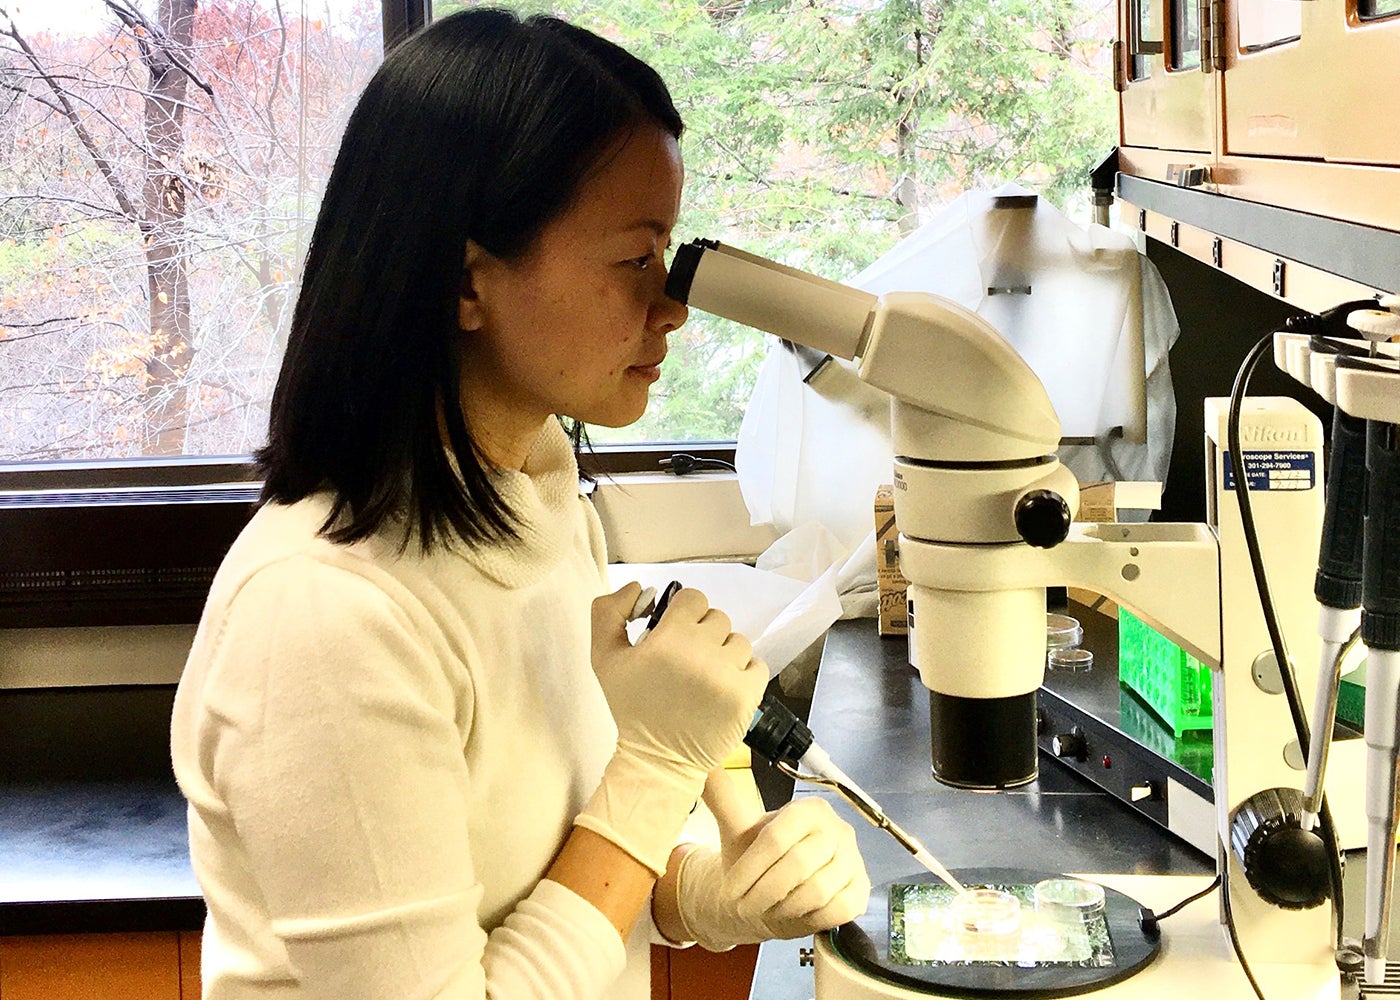 A researcher looks into a microscope and uses a pipette.